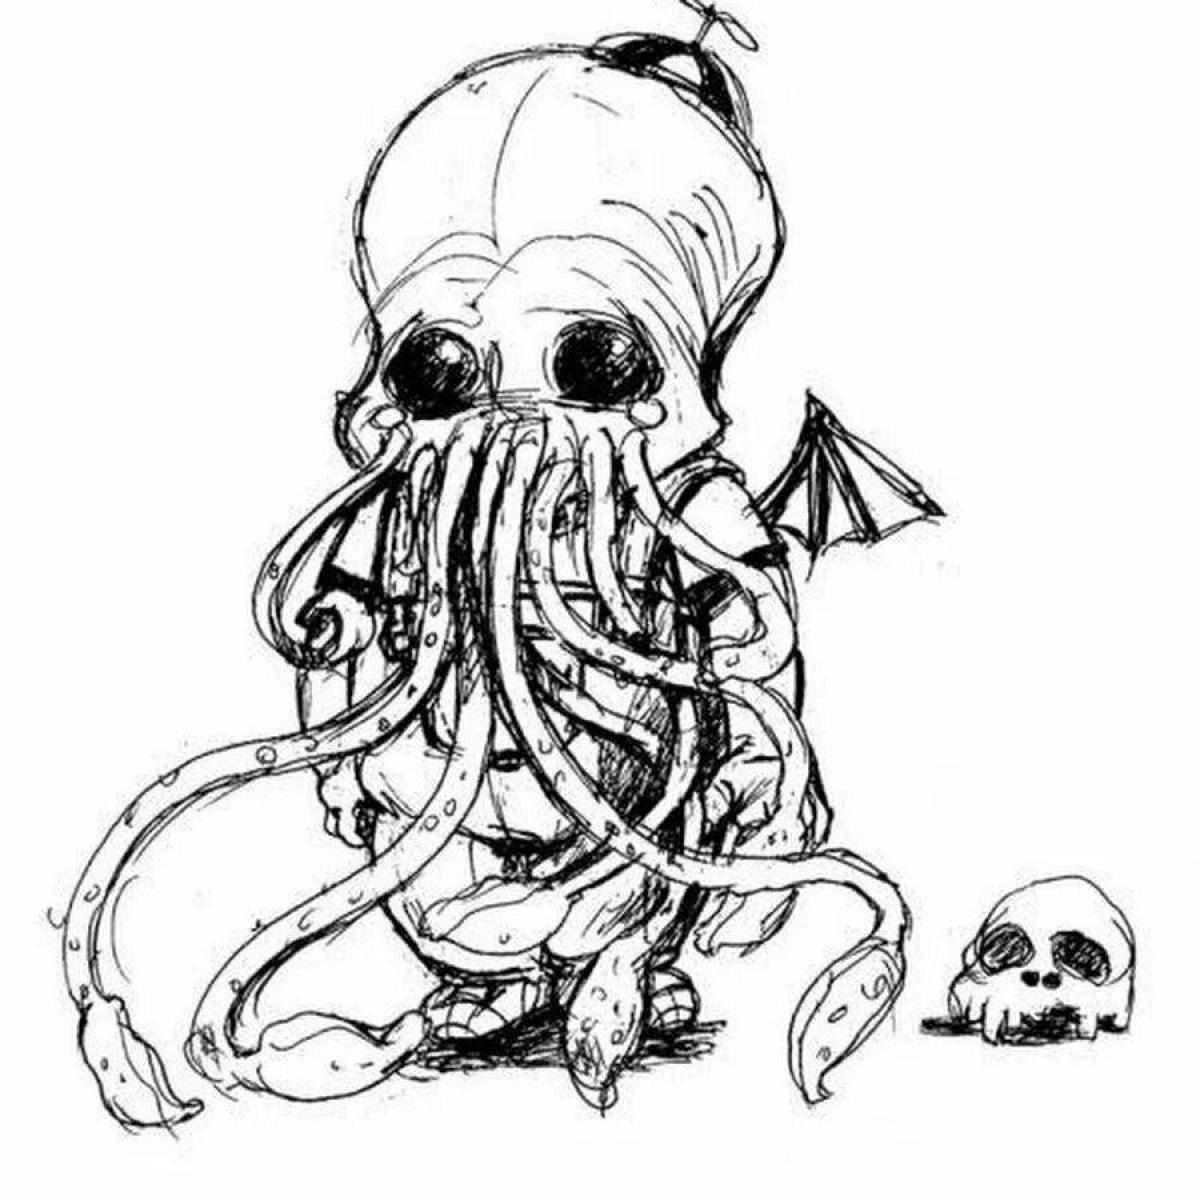 Gorgeous cthulhu coloring book